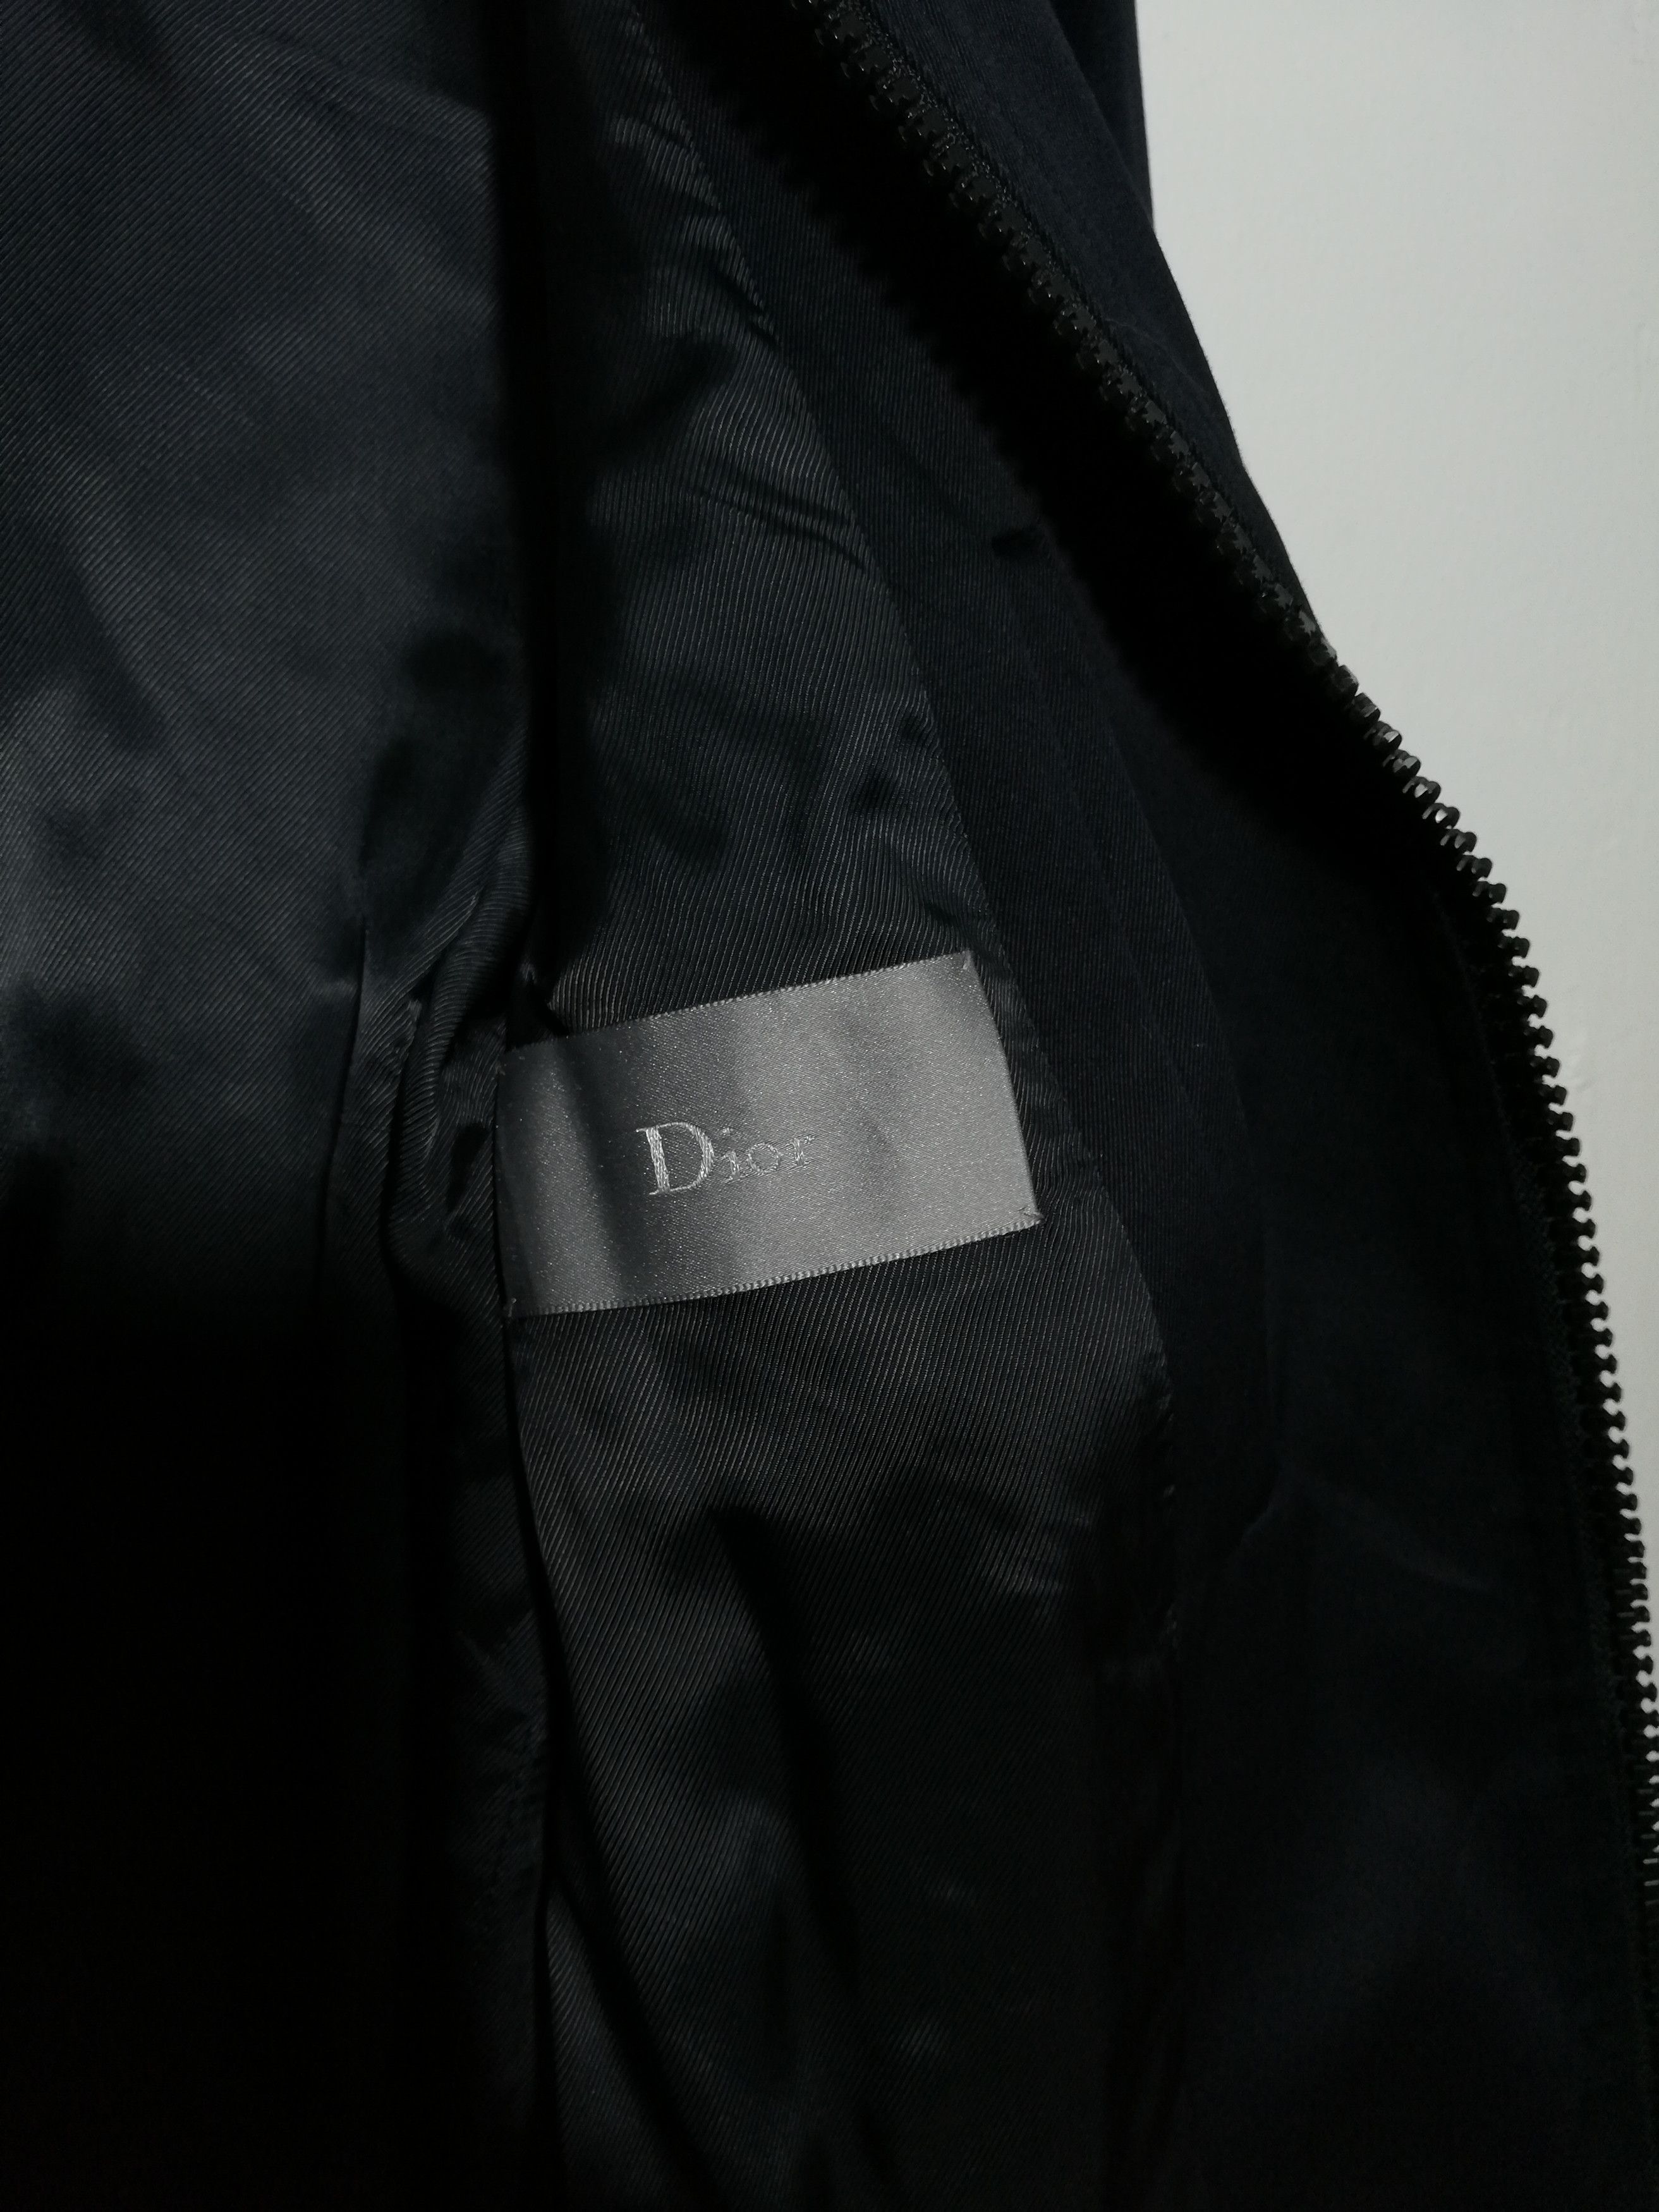 Dior Homme SS07 Bomber Jacket - 10